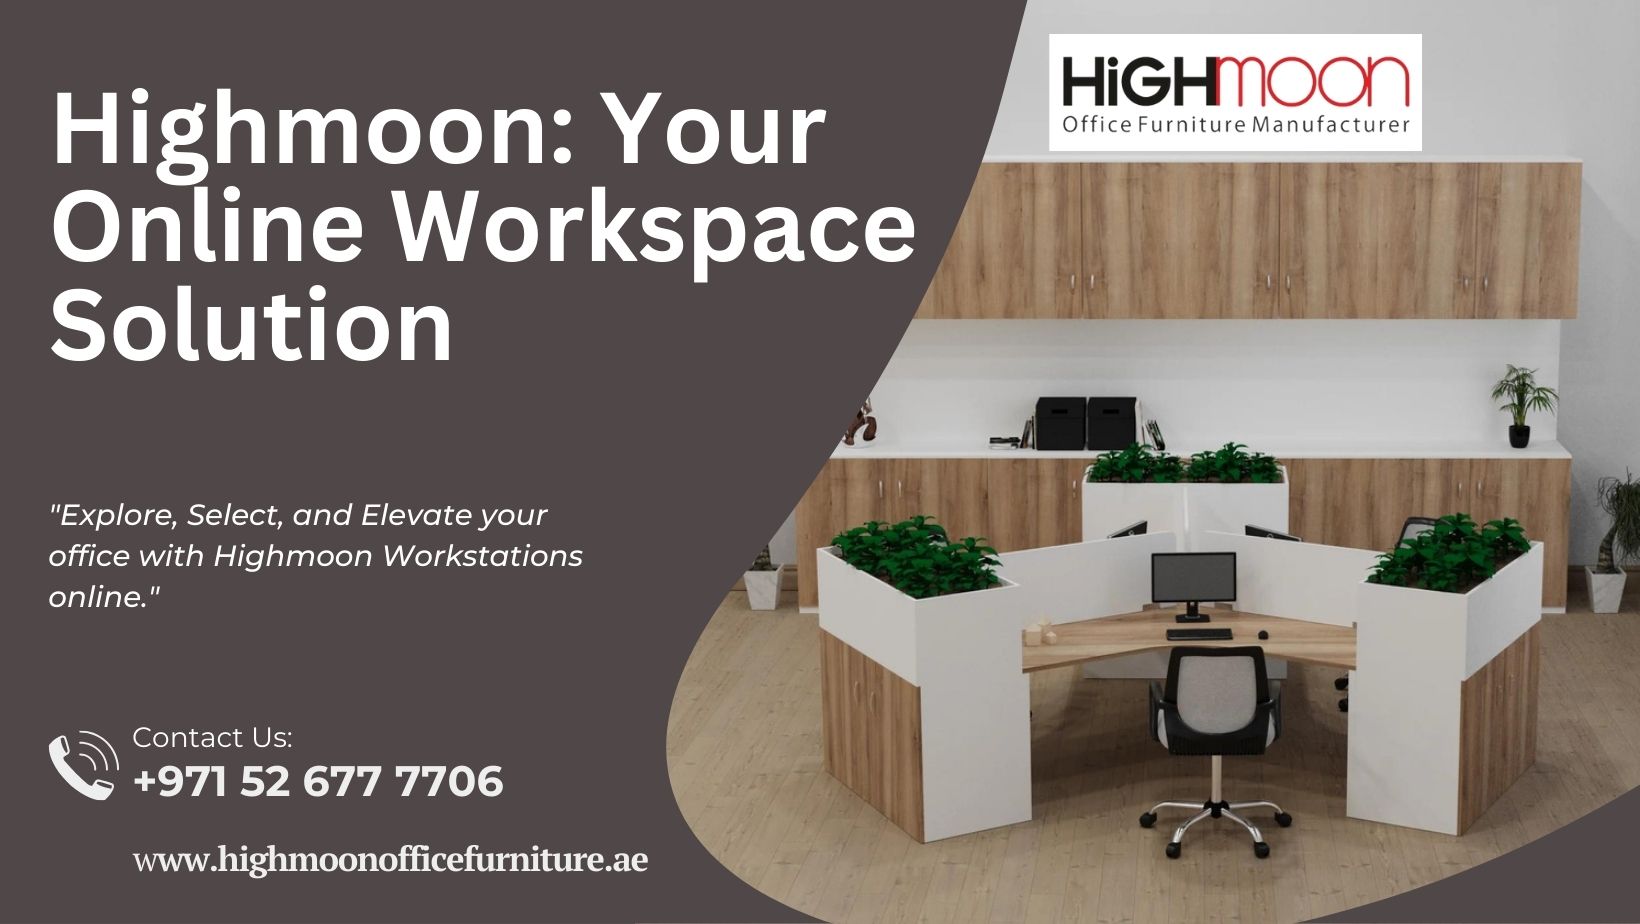 Office Furniture Dubai Online - Visit Our Showroom Today